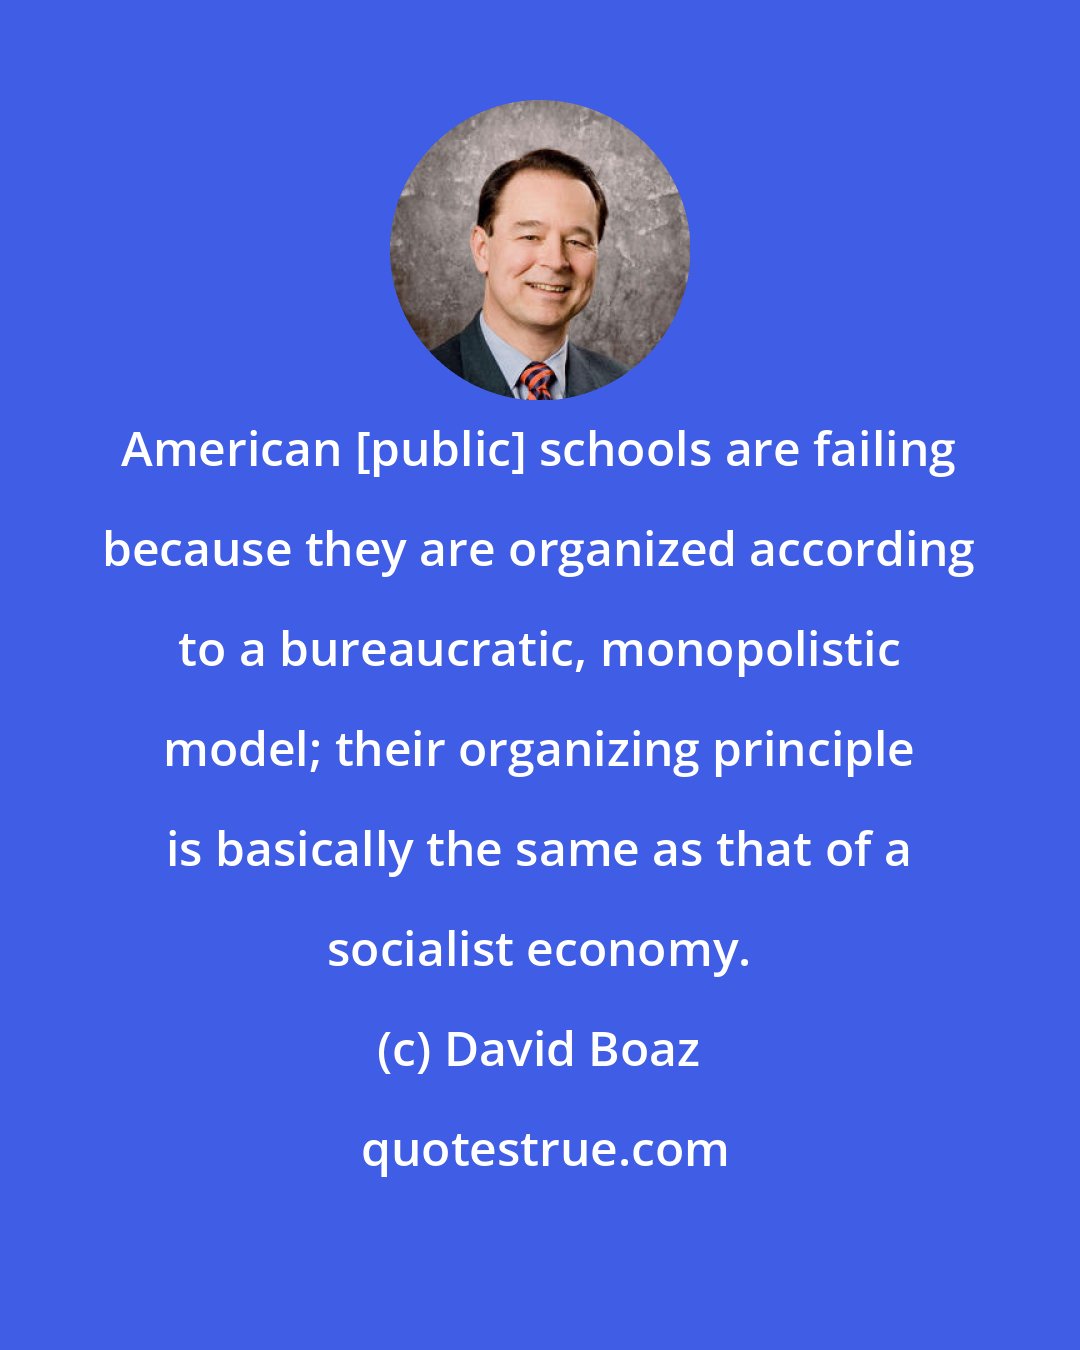 David Boaz: American [public] schools are failing because they are organized according to a bureaucratic, monopolistic model; their organizing principle is basically the same as that of a socialist economy.